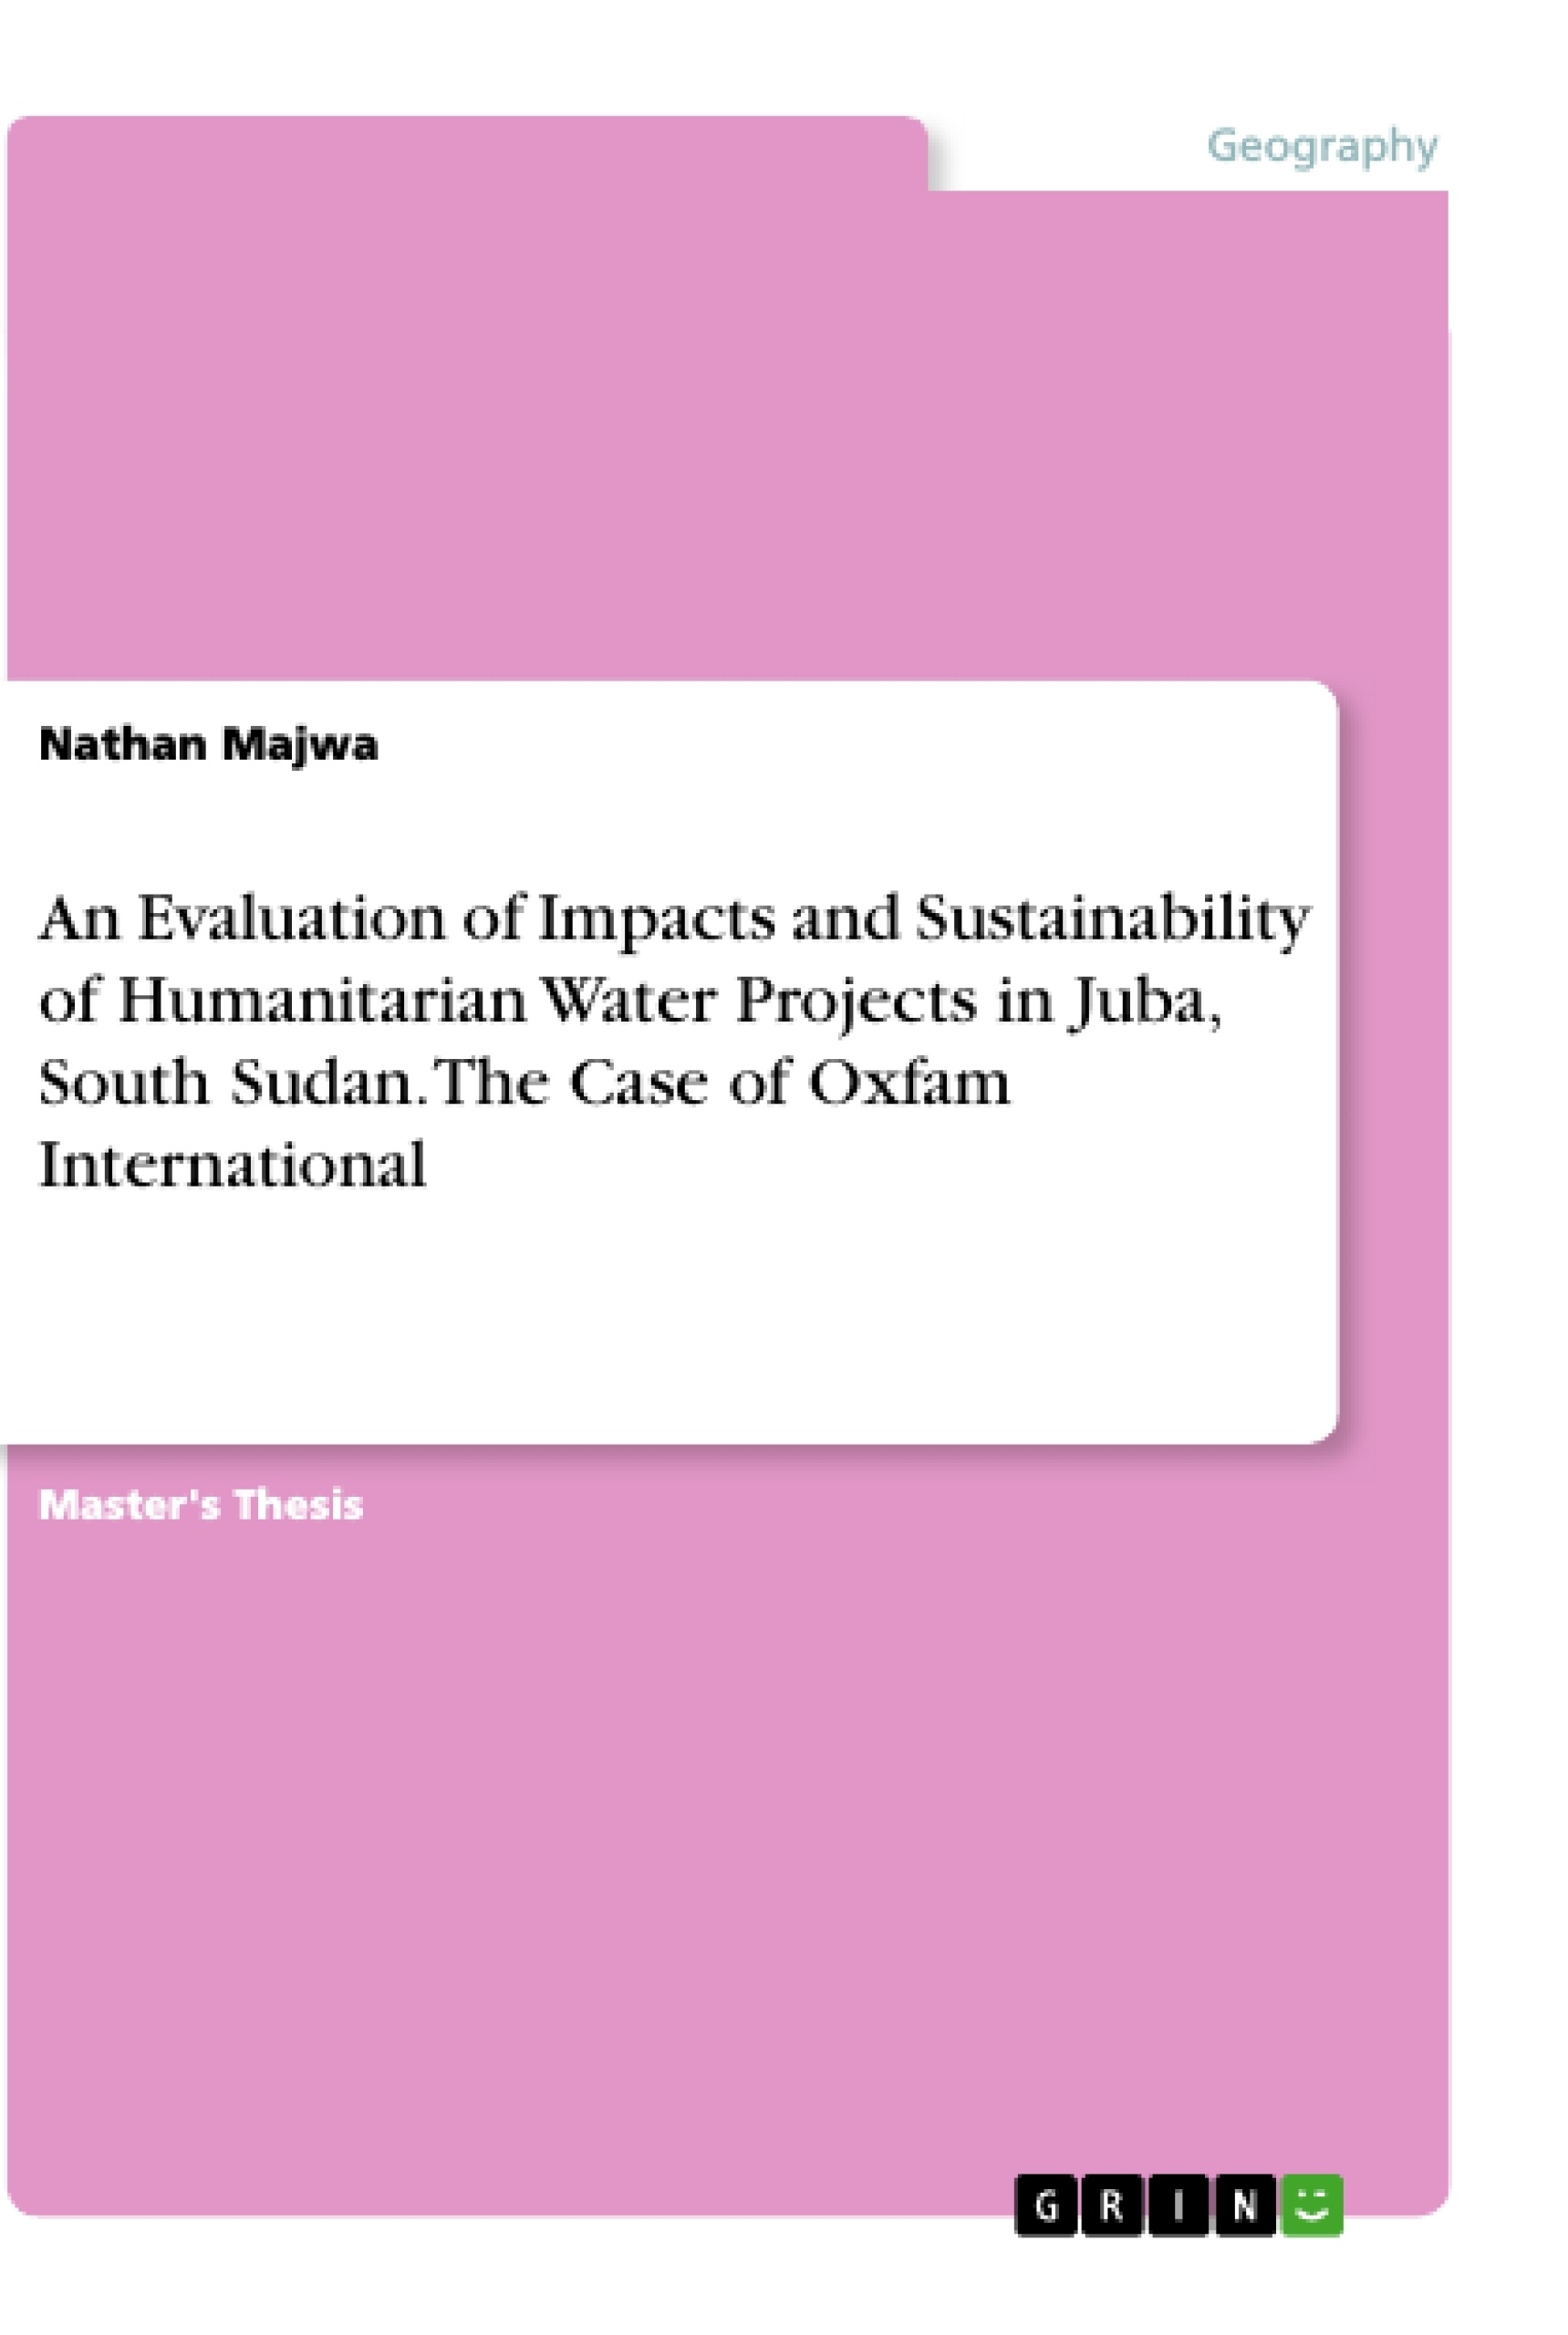 Title: An Evaluation of Impacts and Sustainability of Humanitarian Water Projects in Juba, South Sudan. The Case of Oxfam International